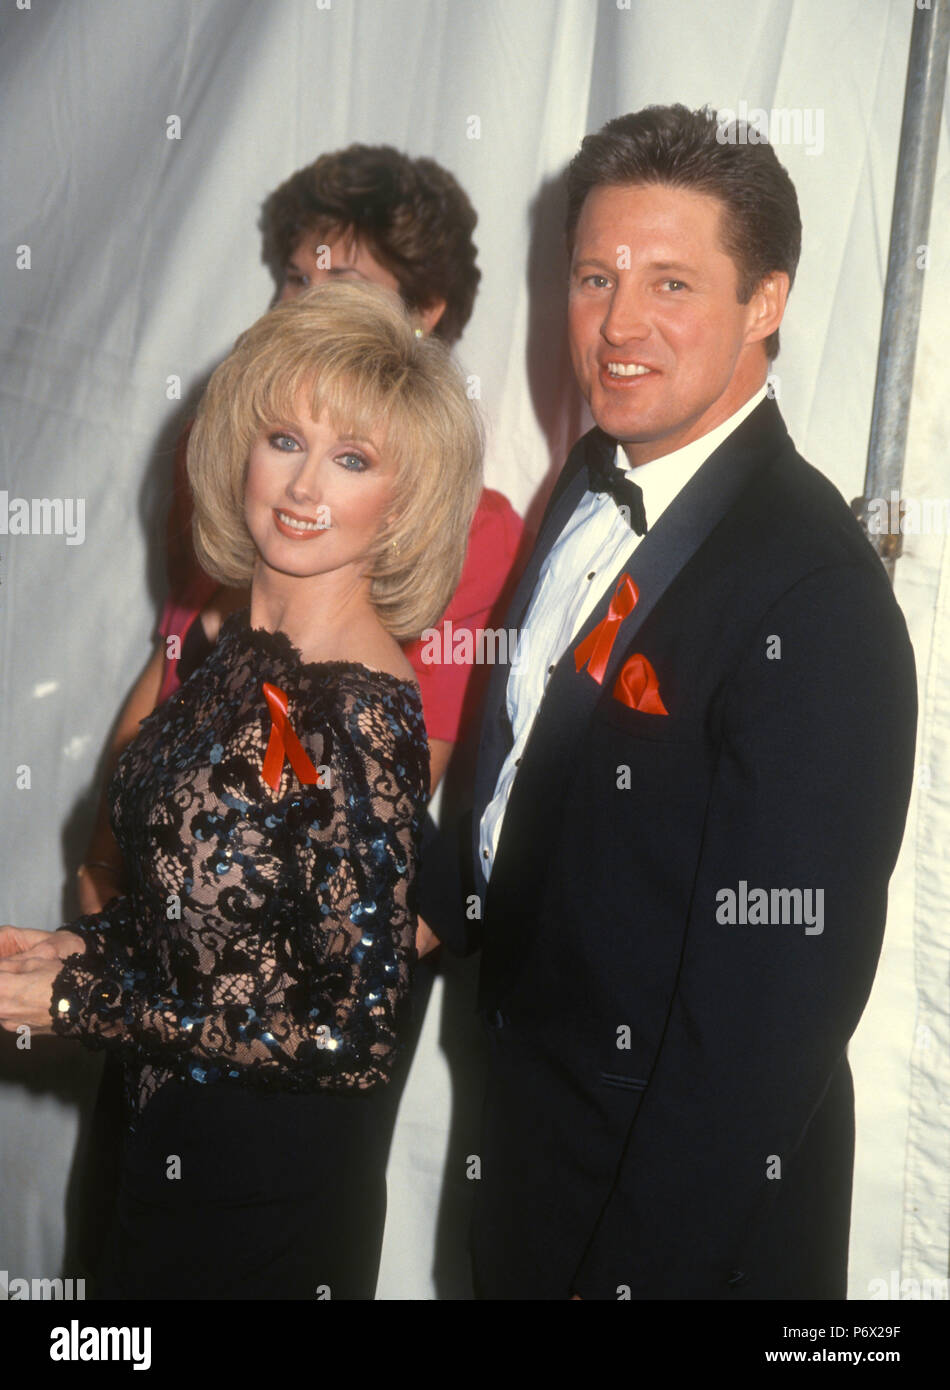 HOLLYWOOD, CA - JANUARY 12: (L-R) Actress Morgan Fairchild and actor Bruce Boxleitner attend the 13th Annual National CableACE Awards on January 12, 1992 at the Pantages Theatre in Hollywood, California. Photo by Barry King/Alamy Stock Photo Stock Photo